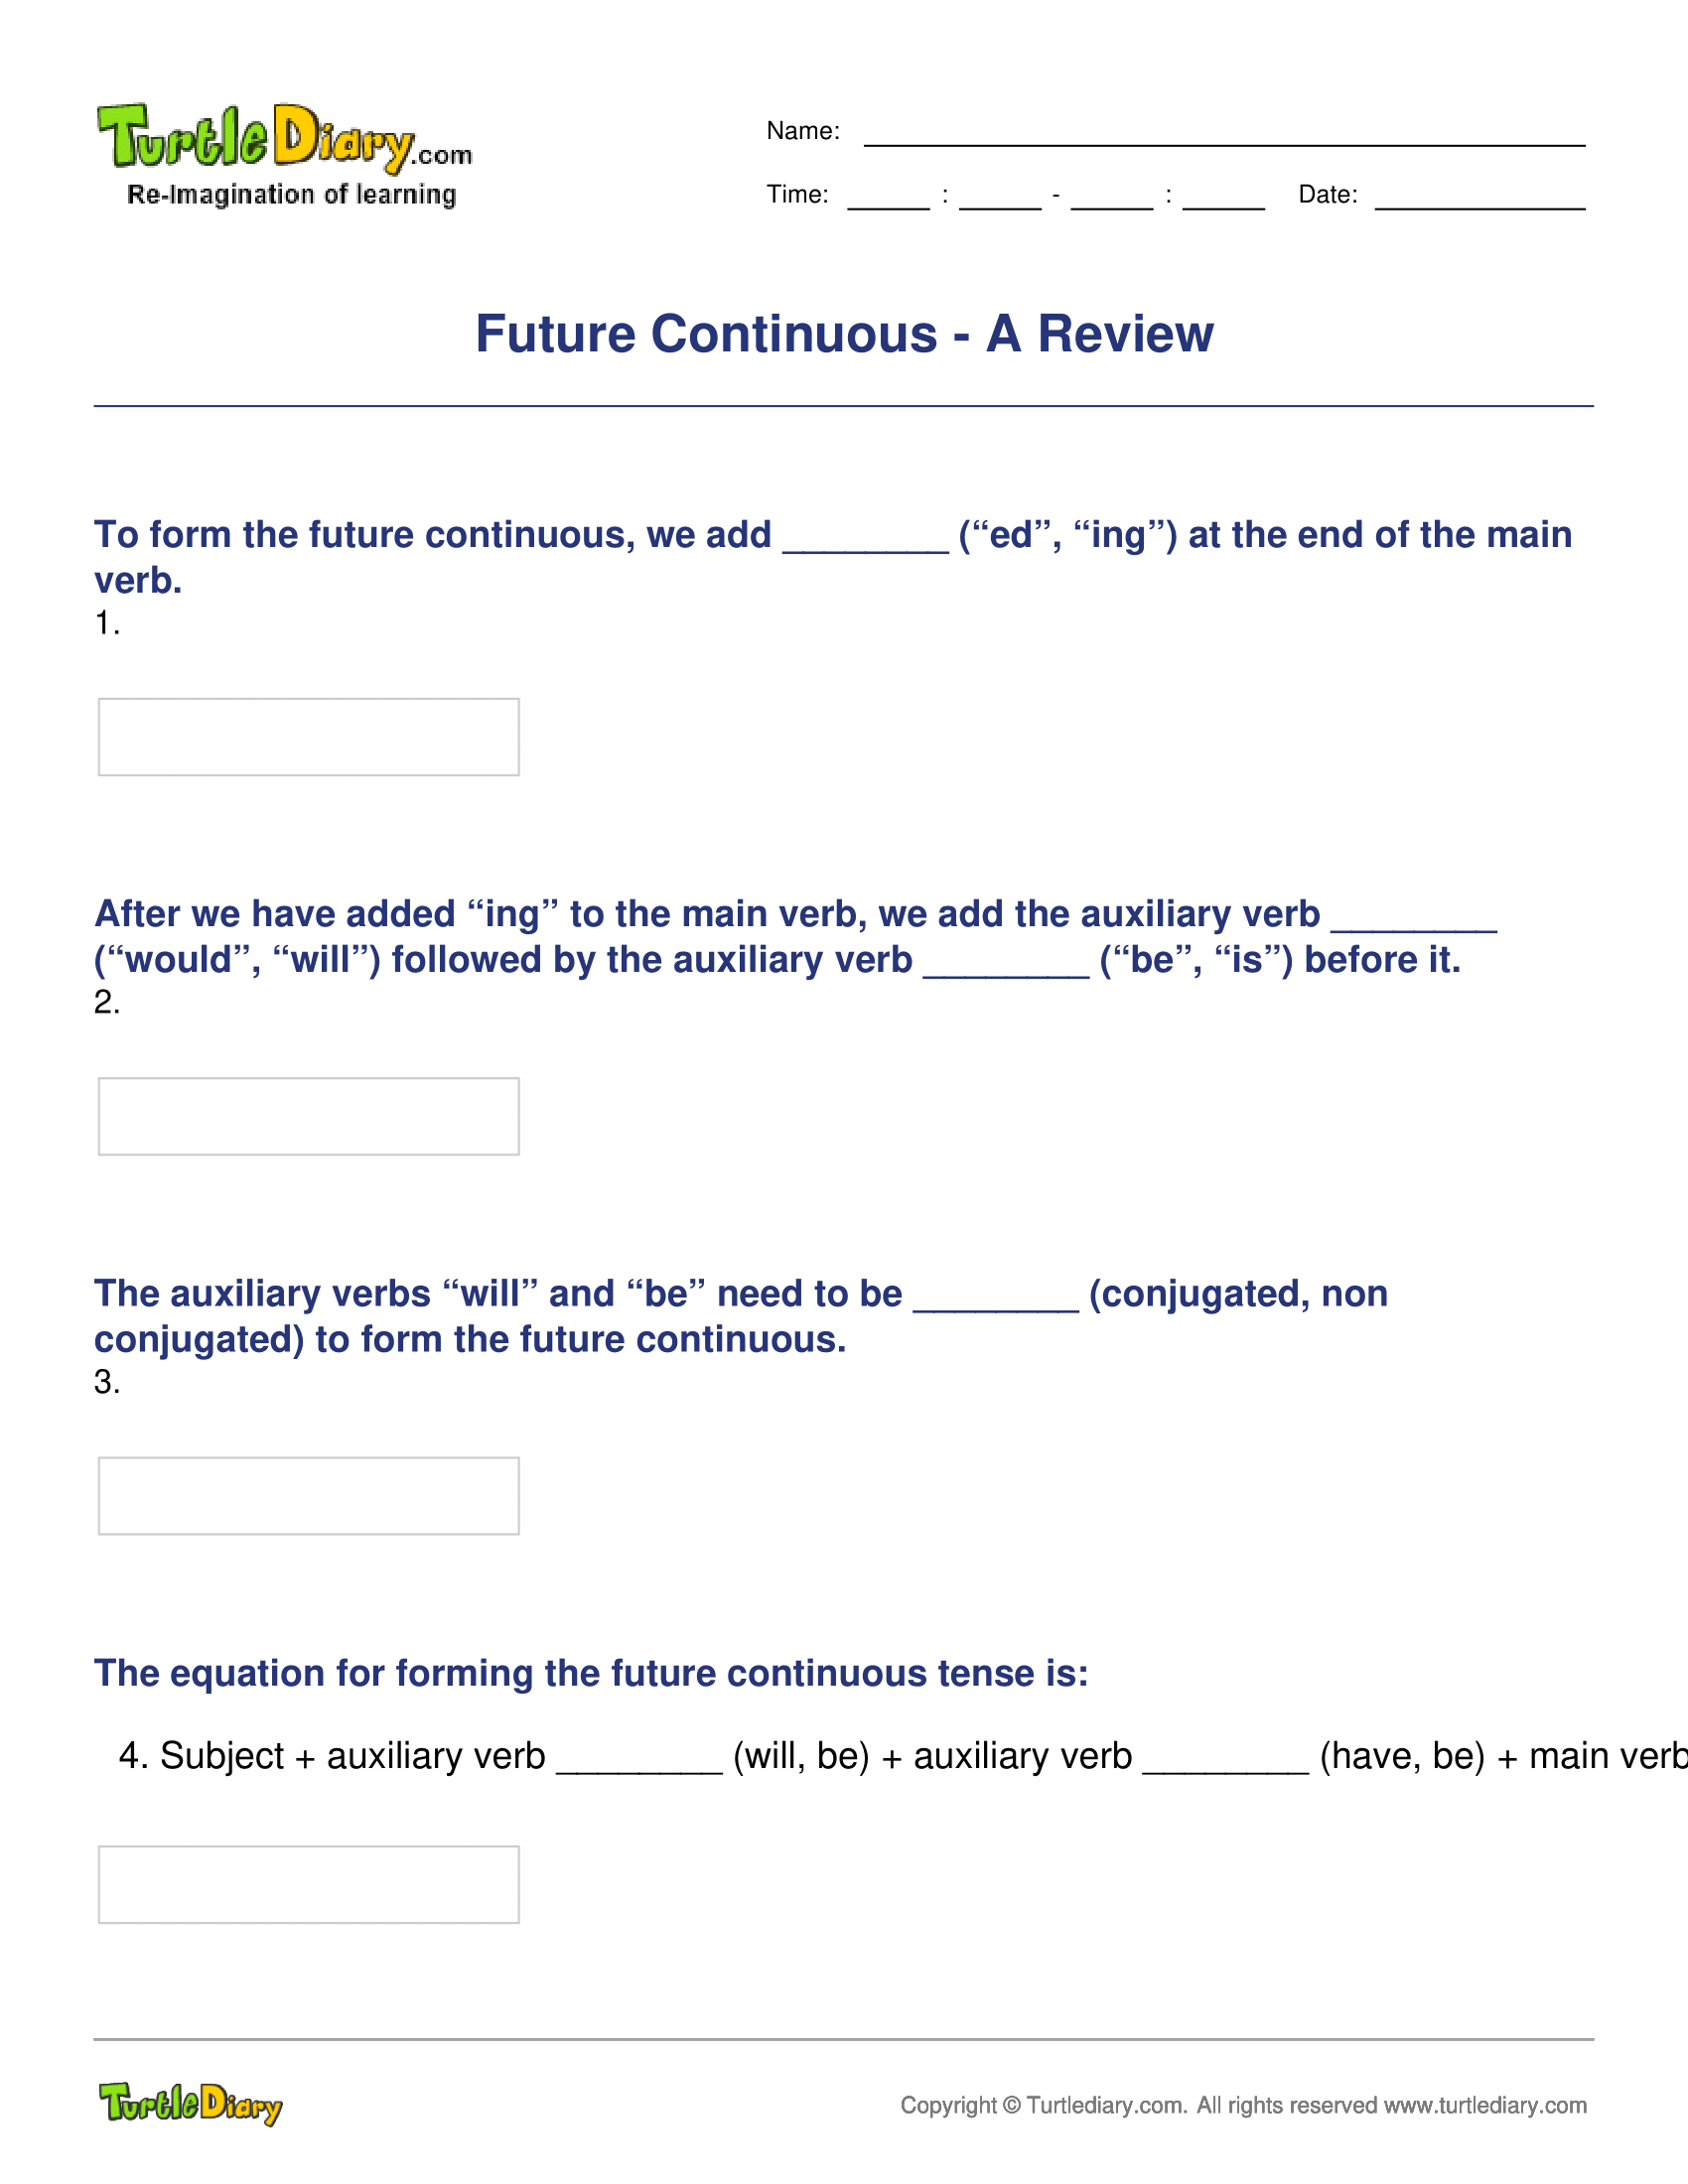 Future Continuous - A Review